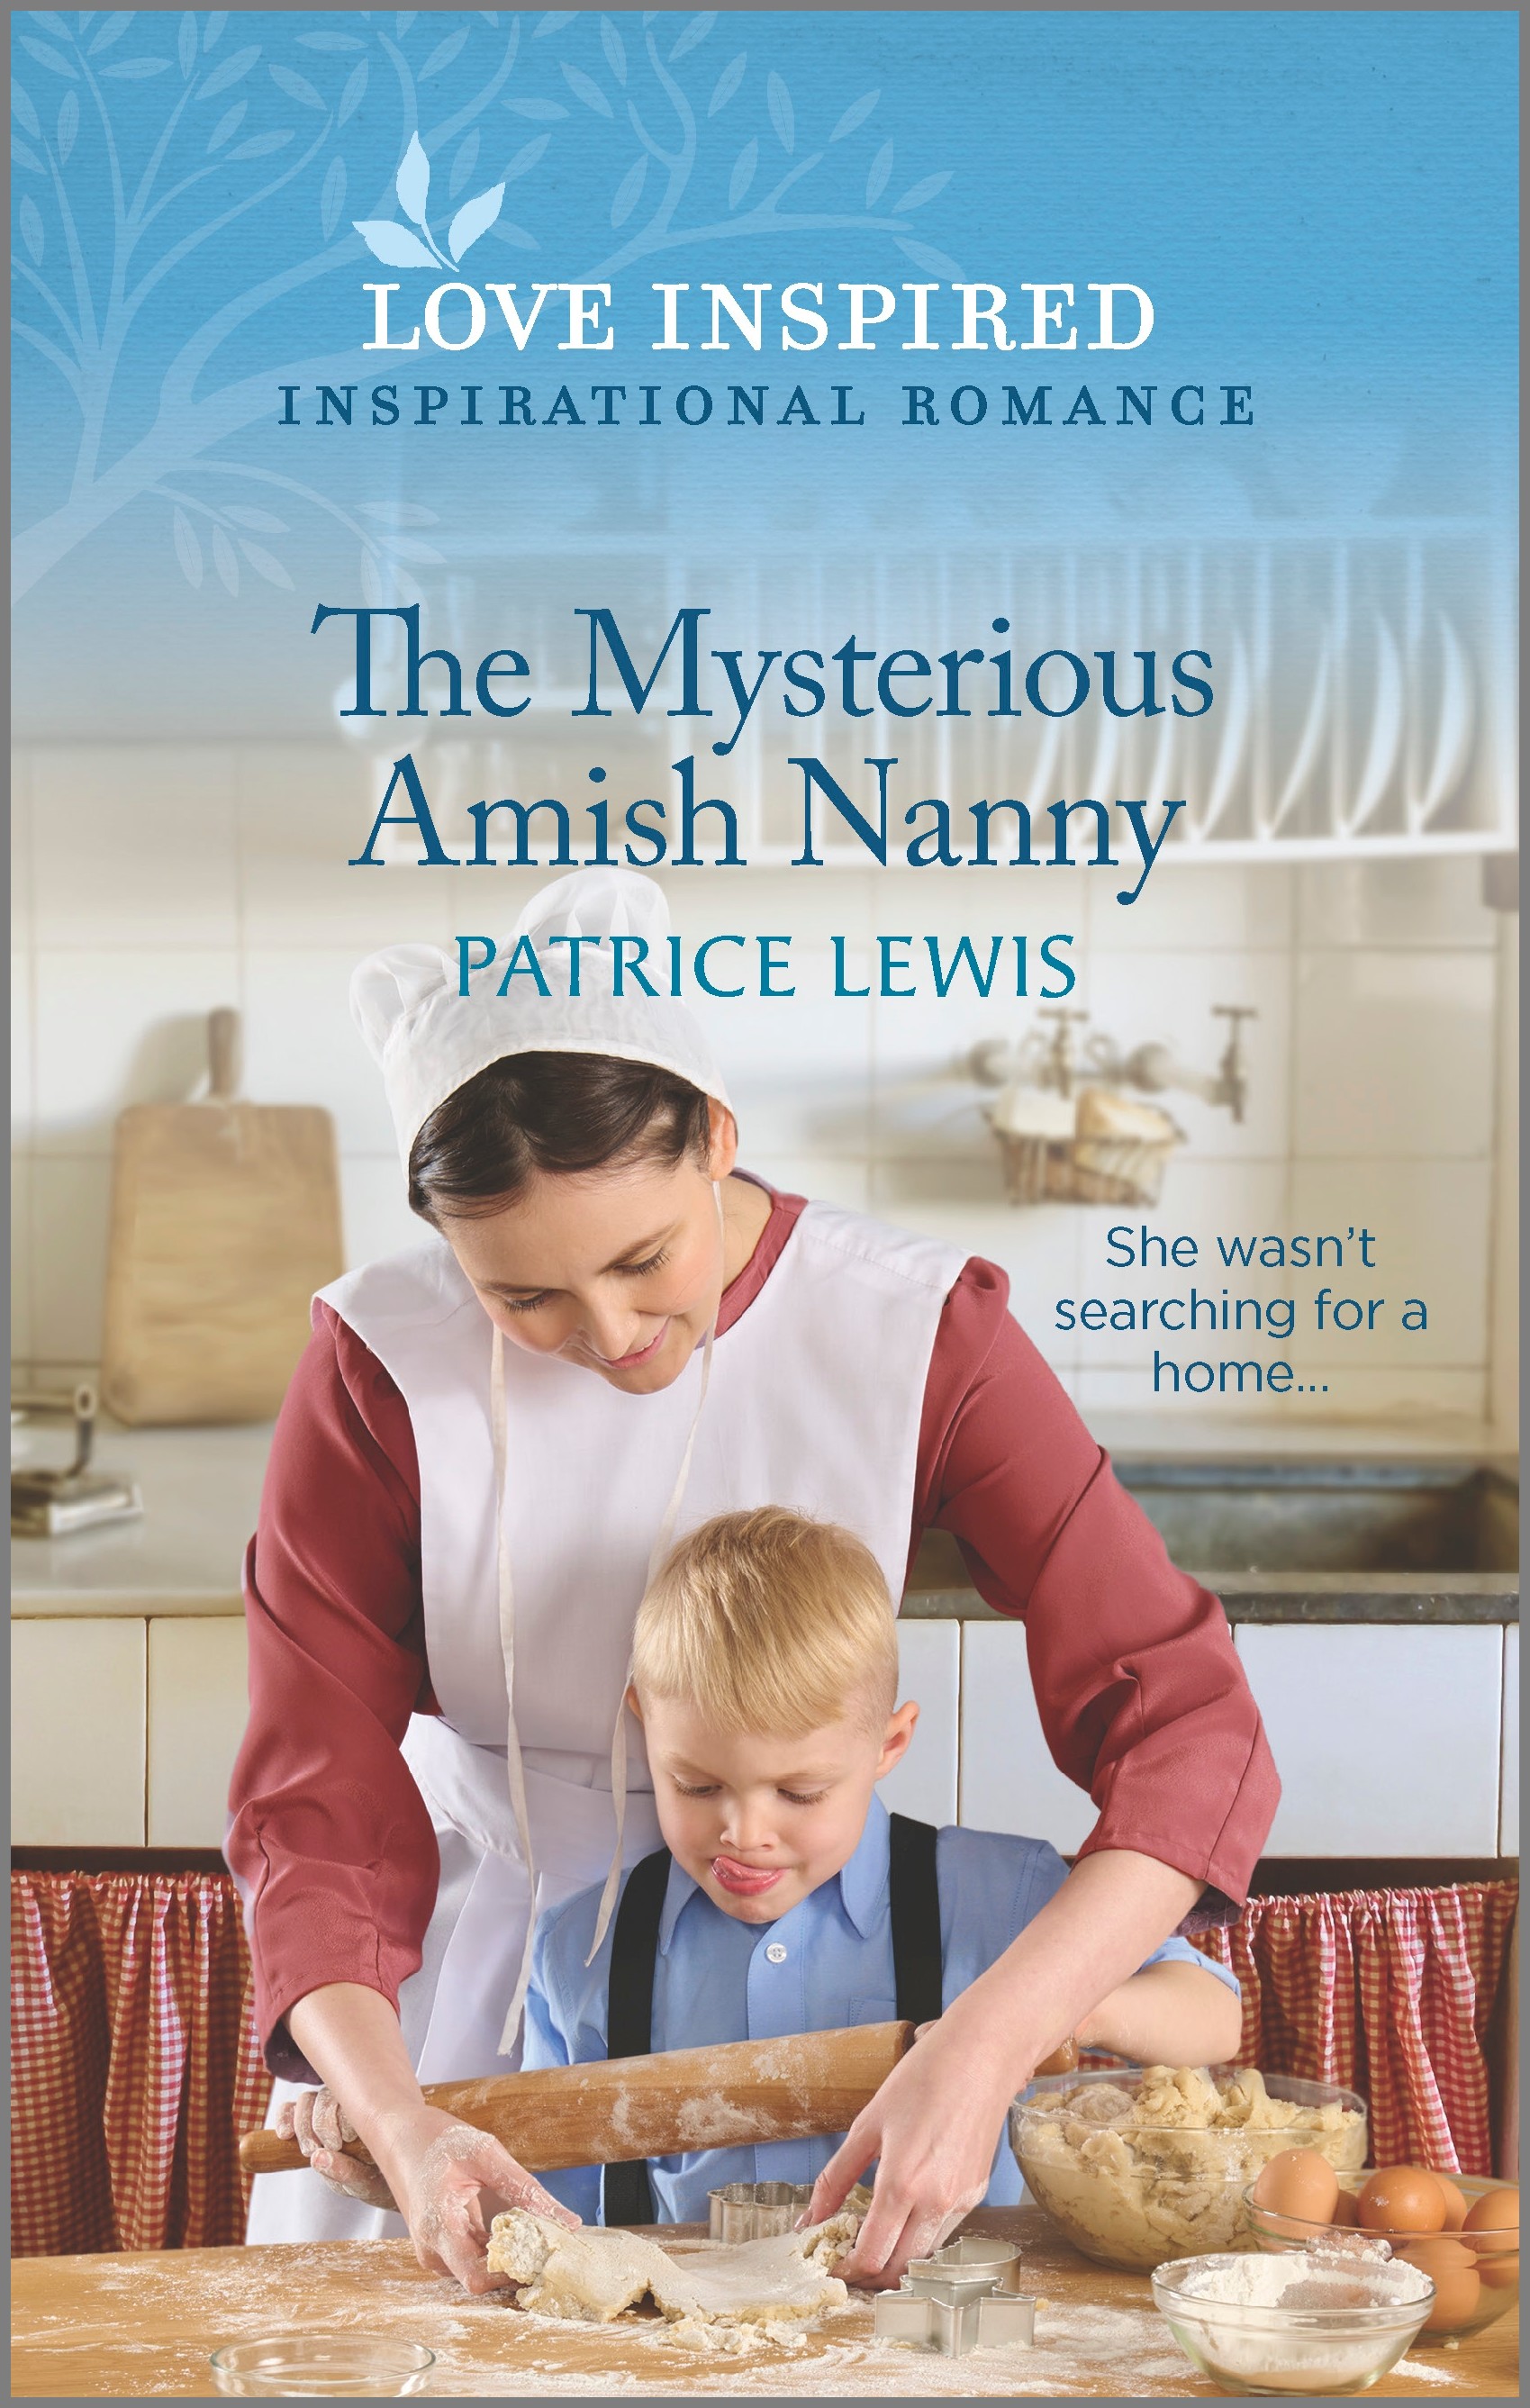 THE MYSTERIOUS AMISH NANNY by Patrice Lewis